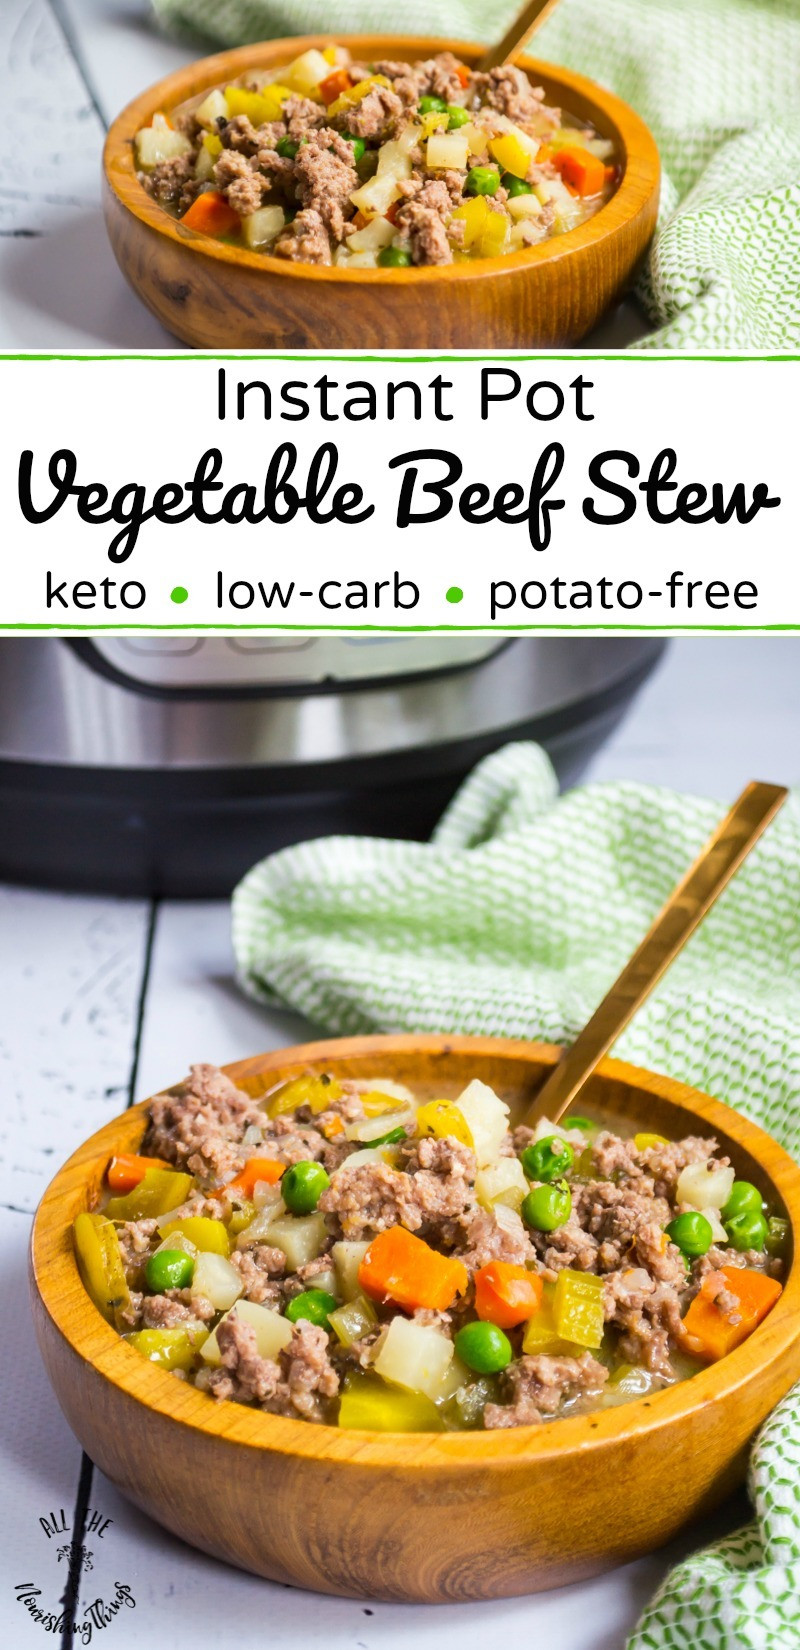 Beef Keto Instant Pot Recipes
 Instant Pot Ve able Beef Stew keto Whole30 potato free